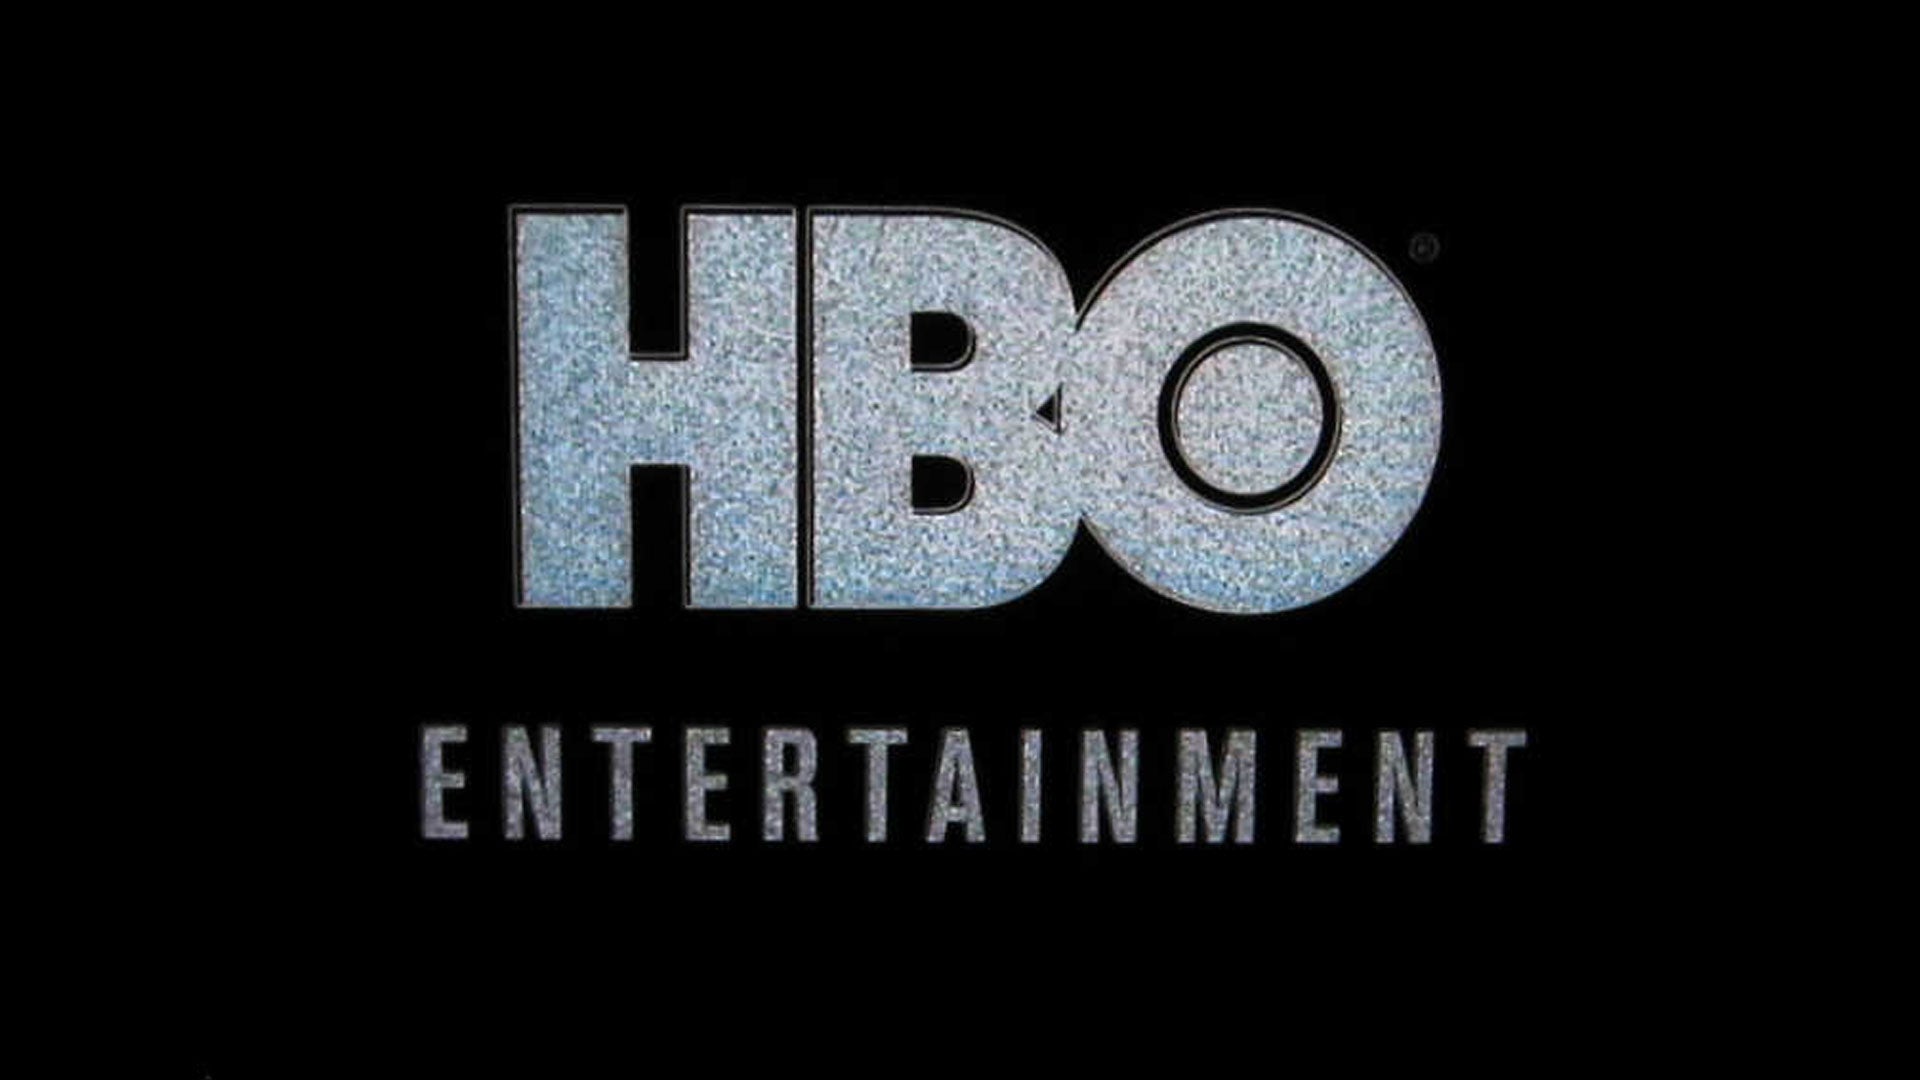 Hbo Porn Shows - HBO Explains Why They Removed 'Adult' Content From Lineup | CBN News